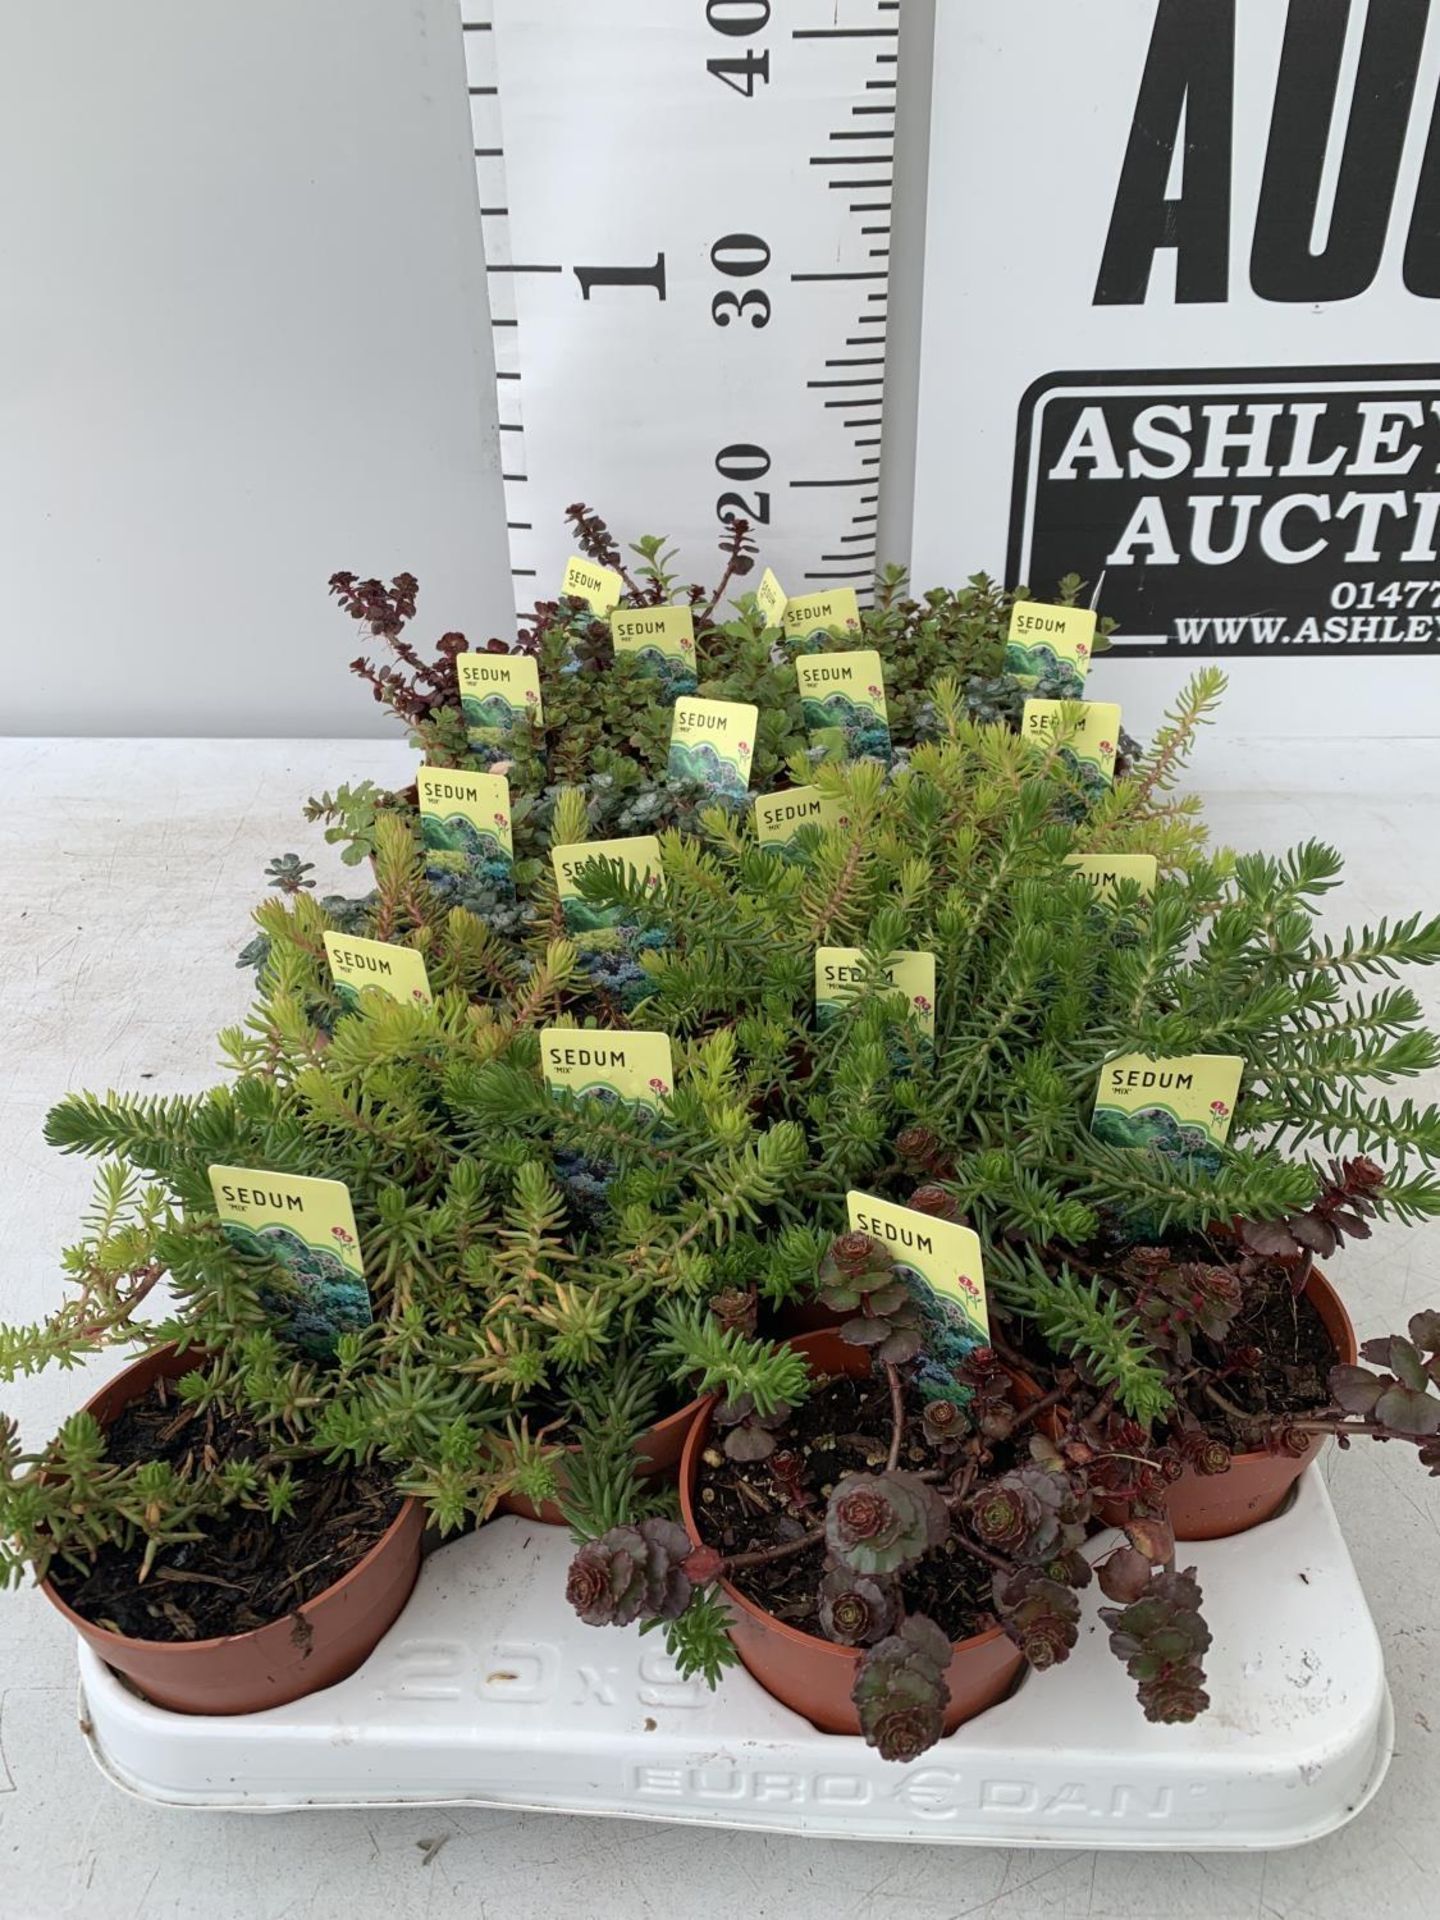 TWENTY MIXED SEDUMS ON A TRAY PLUS VAT TO BE SOLD FOR THE TWENTY - Image 2 of 10